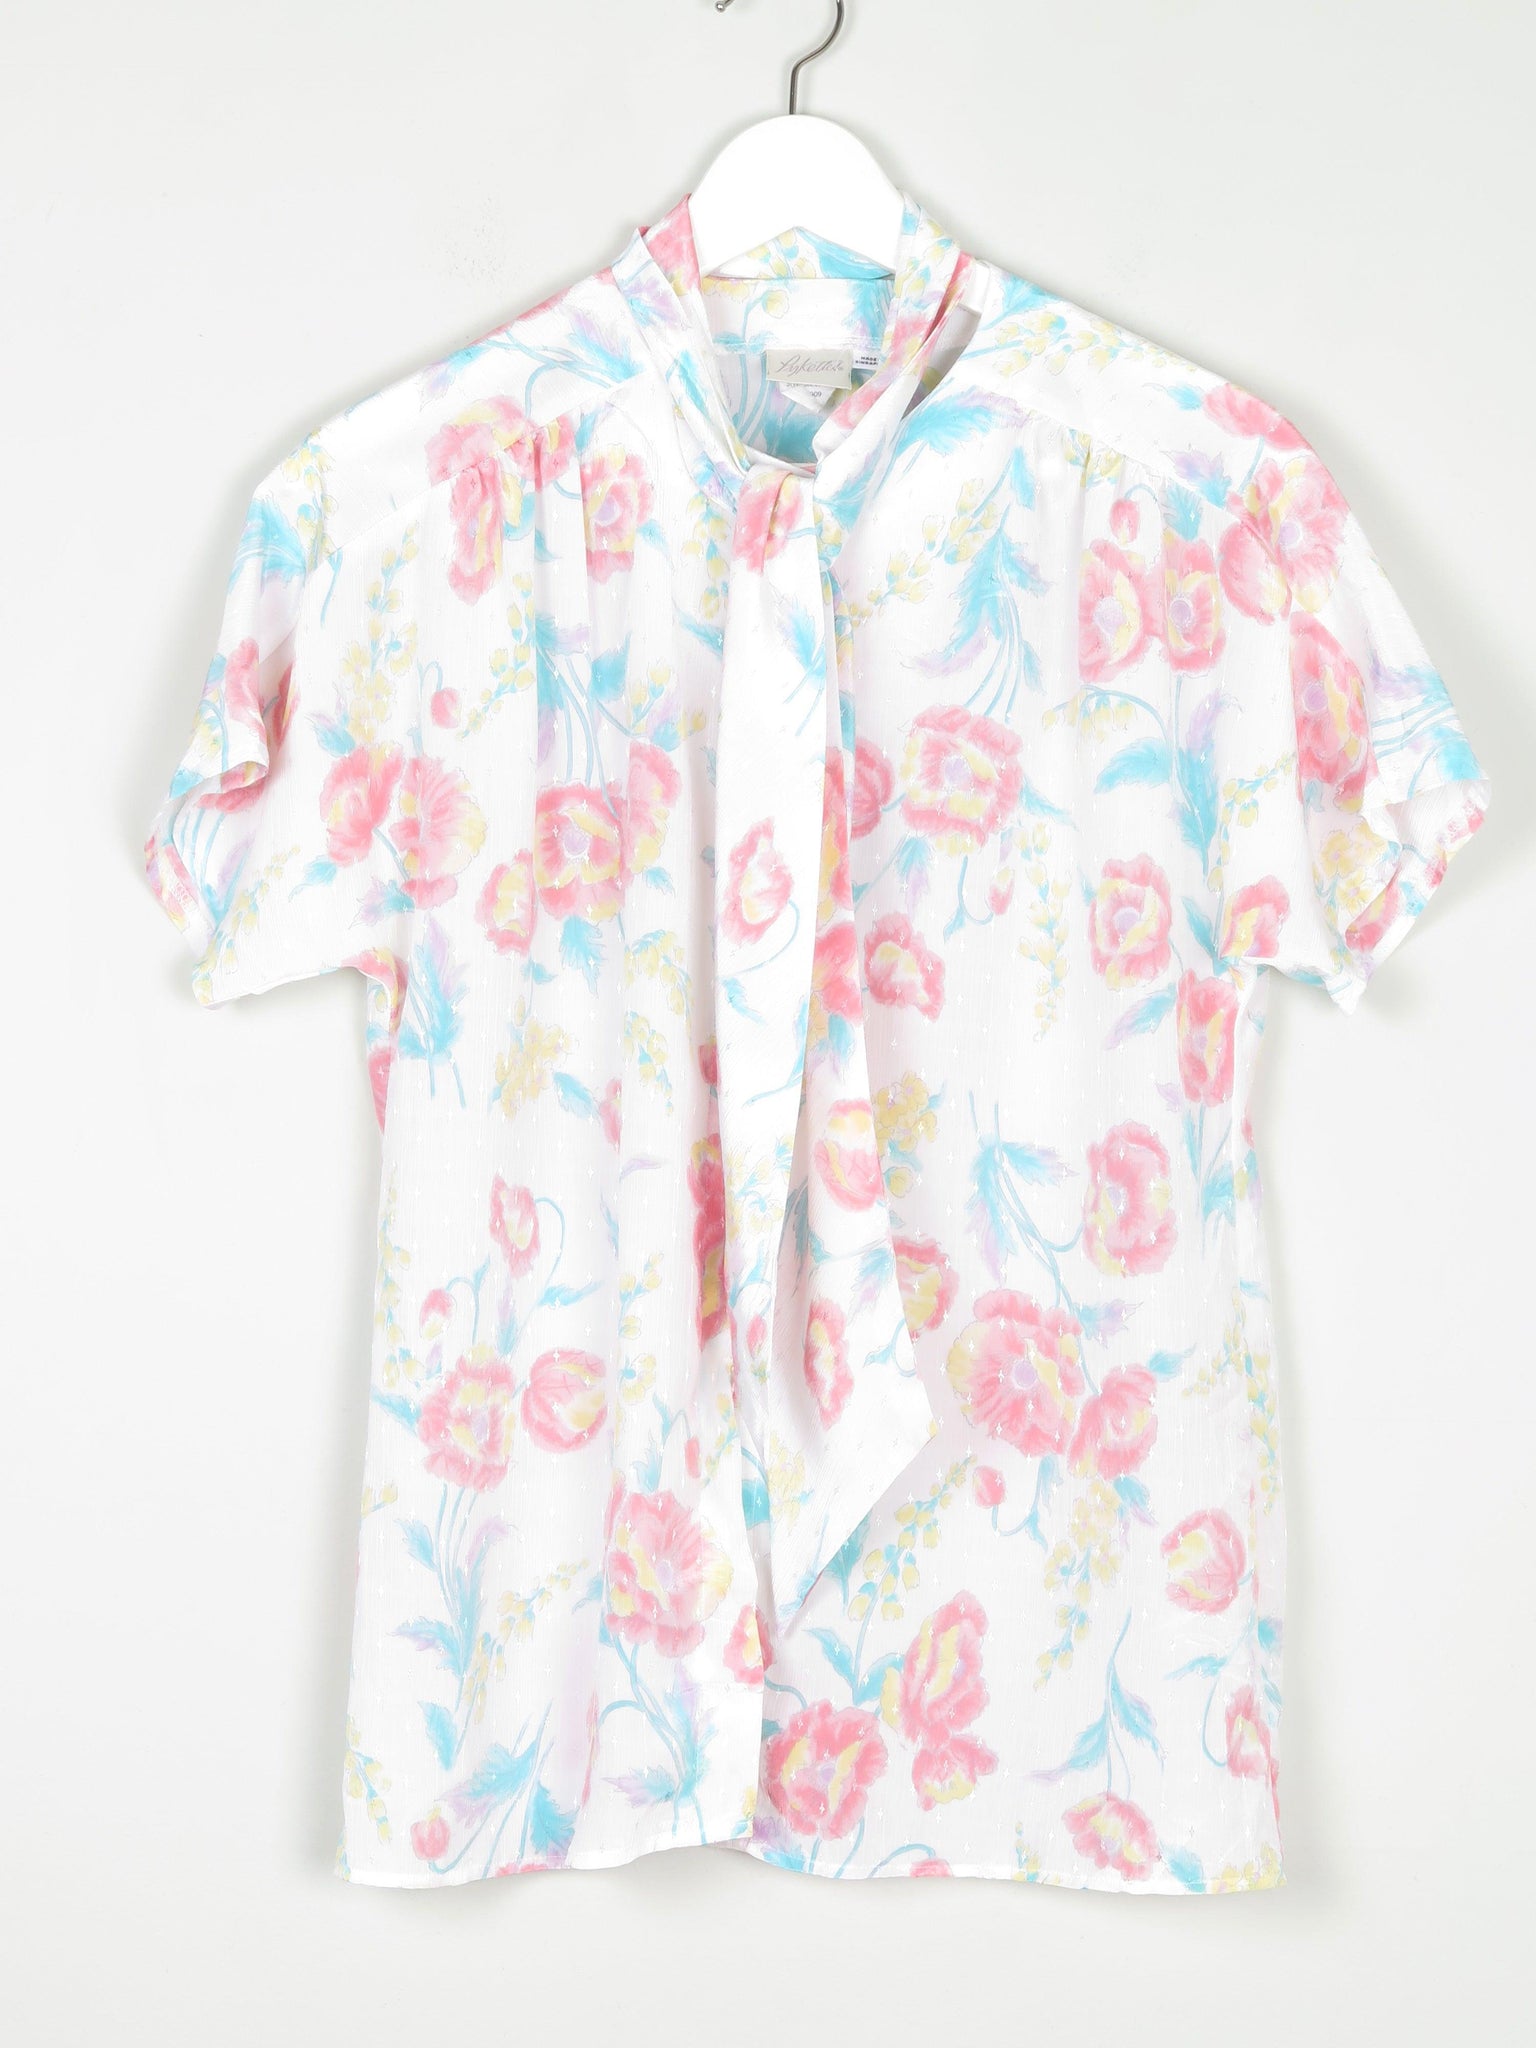 Women’s Floral Short-Sleeved Blouse With Tie Neck S - The Harlequin